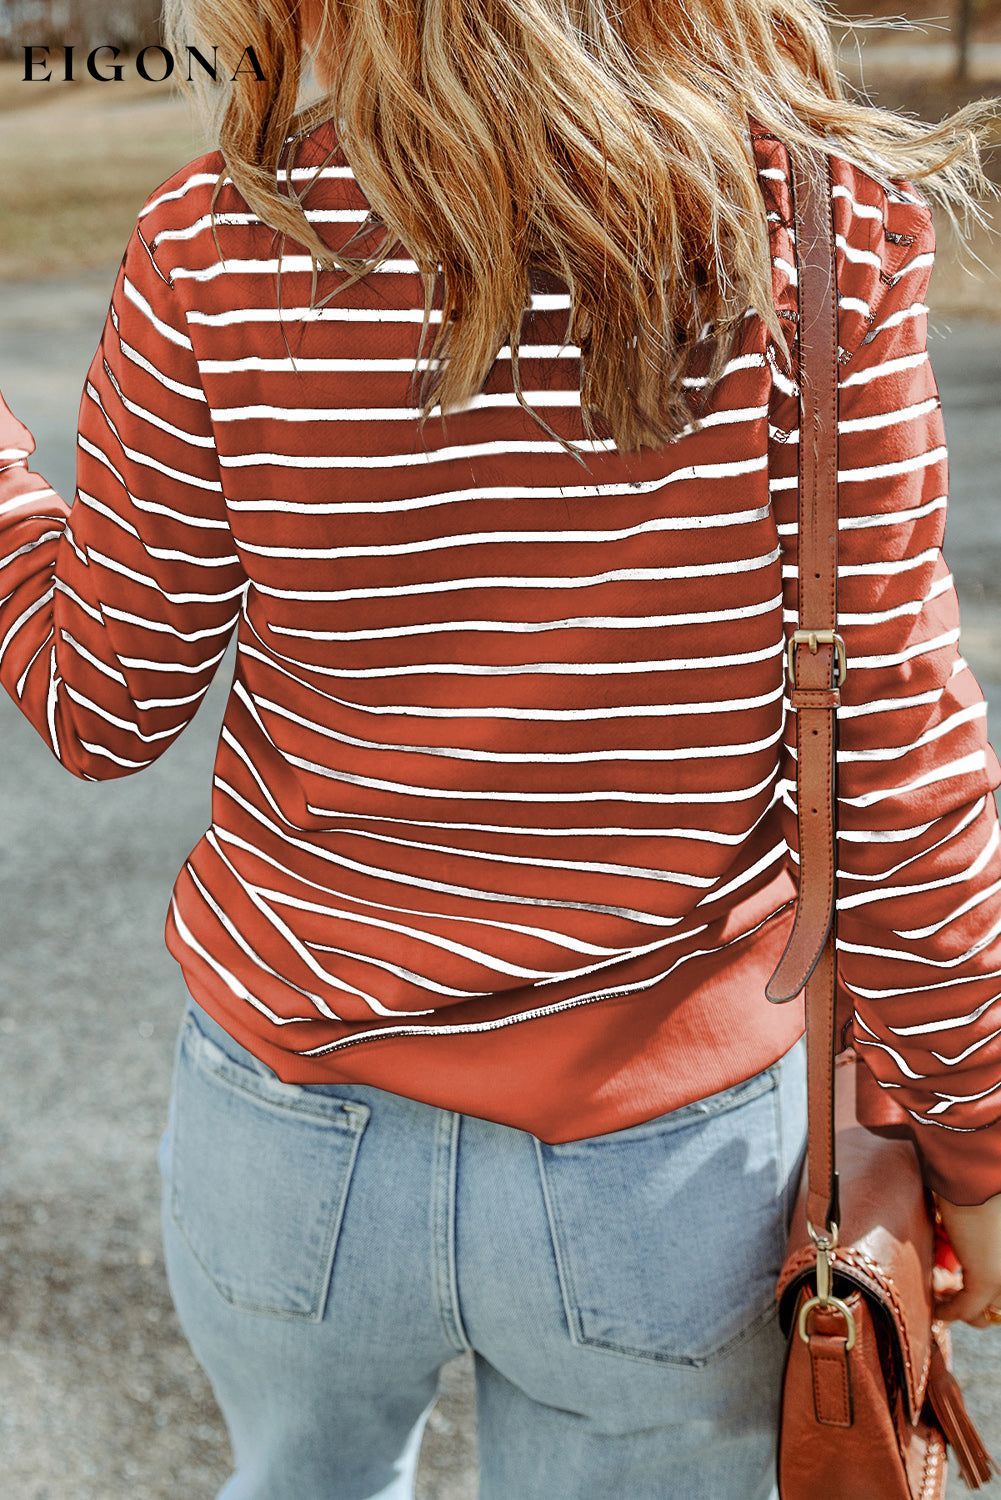 Striped Long Sleeve Round Neck Top clothes Ship From Overseas shirt SYNZ top trend